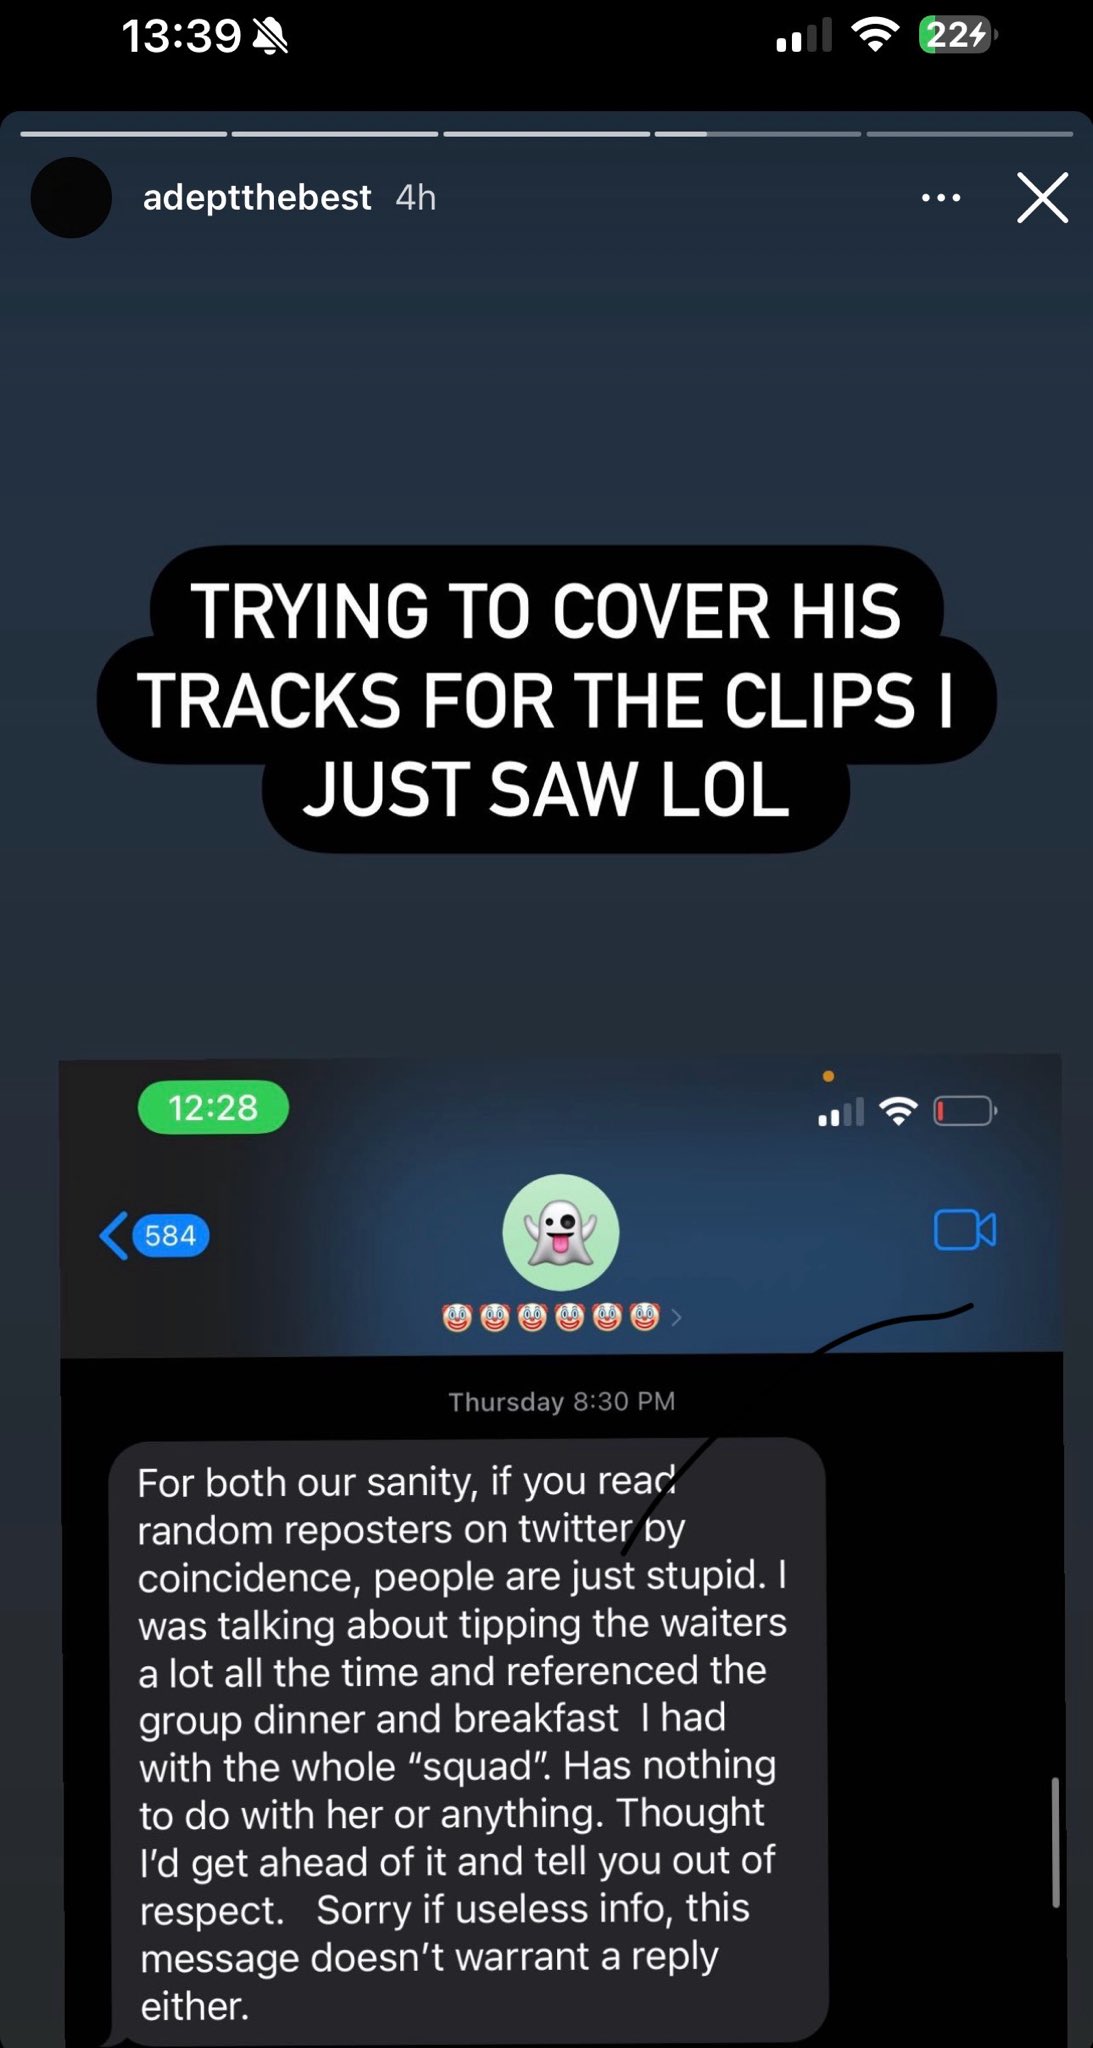 FRAN confirms relationship with xQc in Instagram story and announced she'll  delete her main Instagram for privacy reasons. New Instagram limited to  friends, family, and co-workers : r/OverwatchTMZ